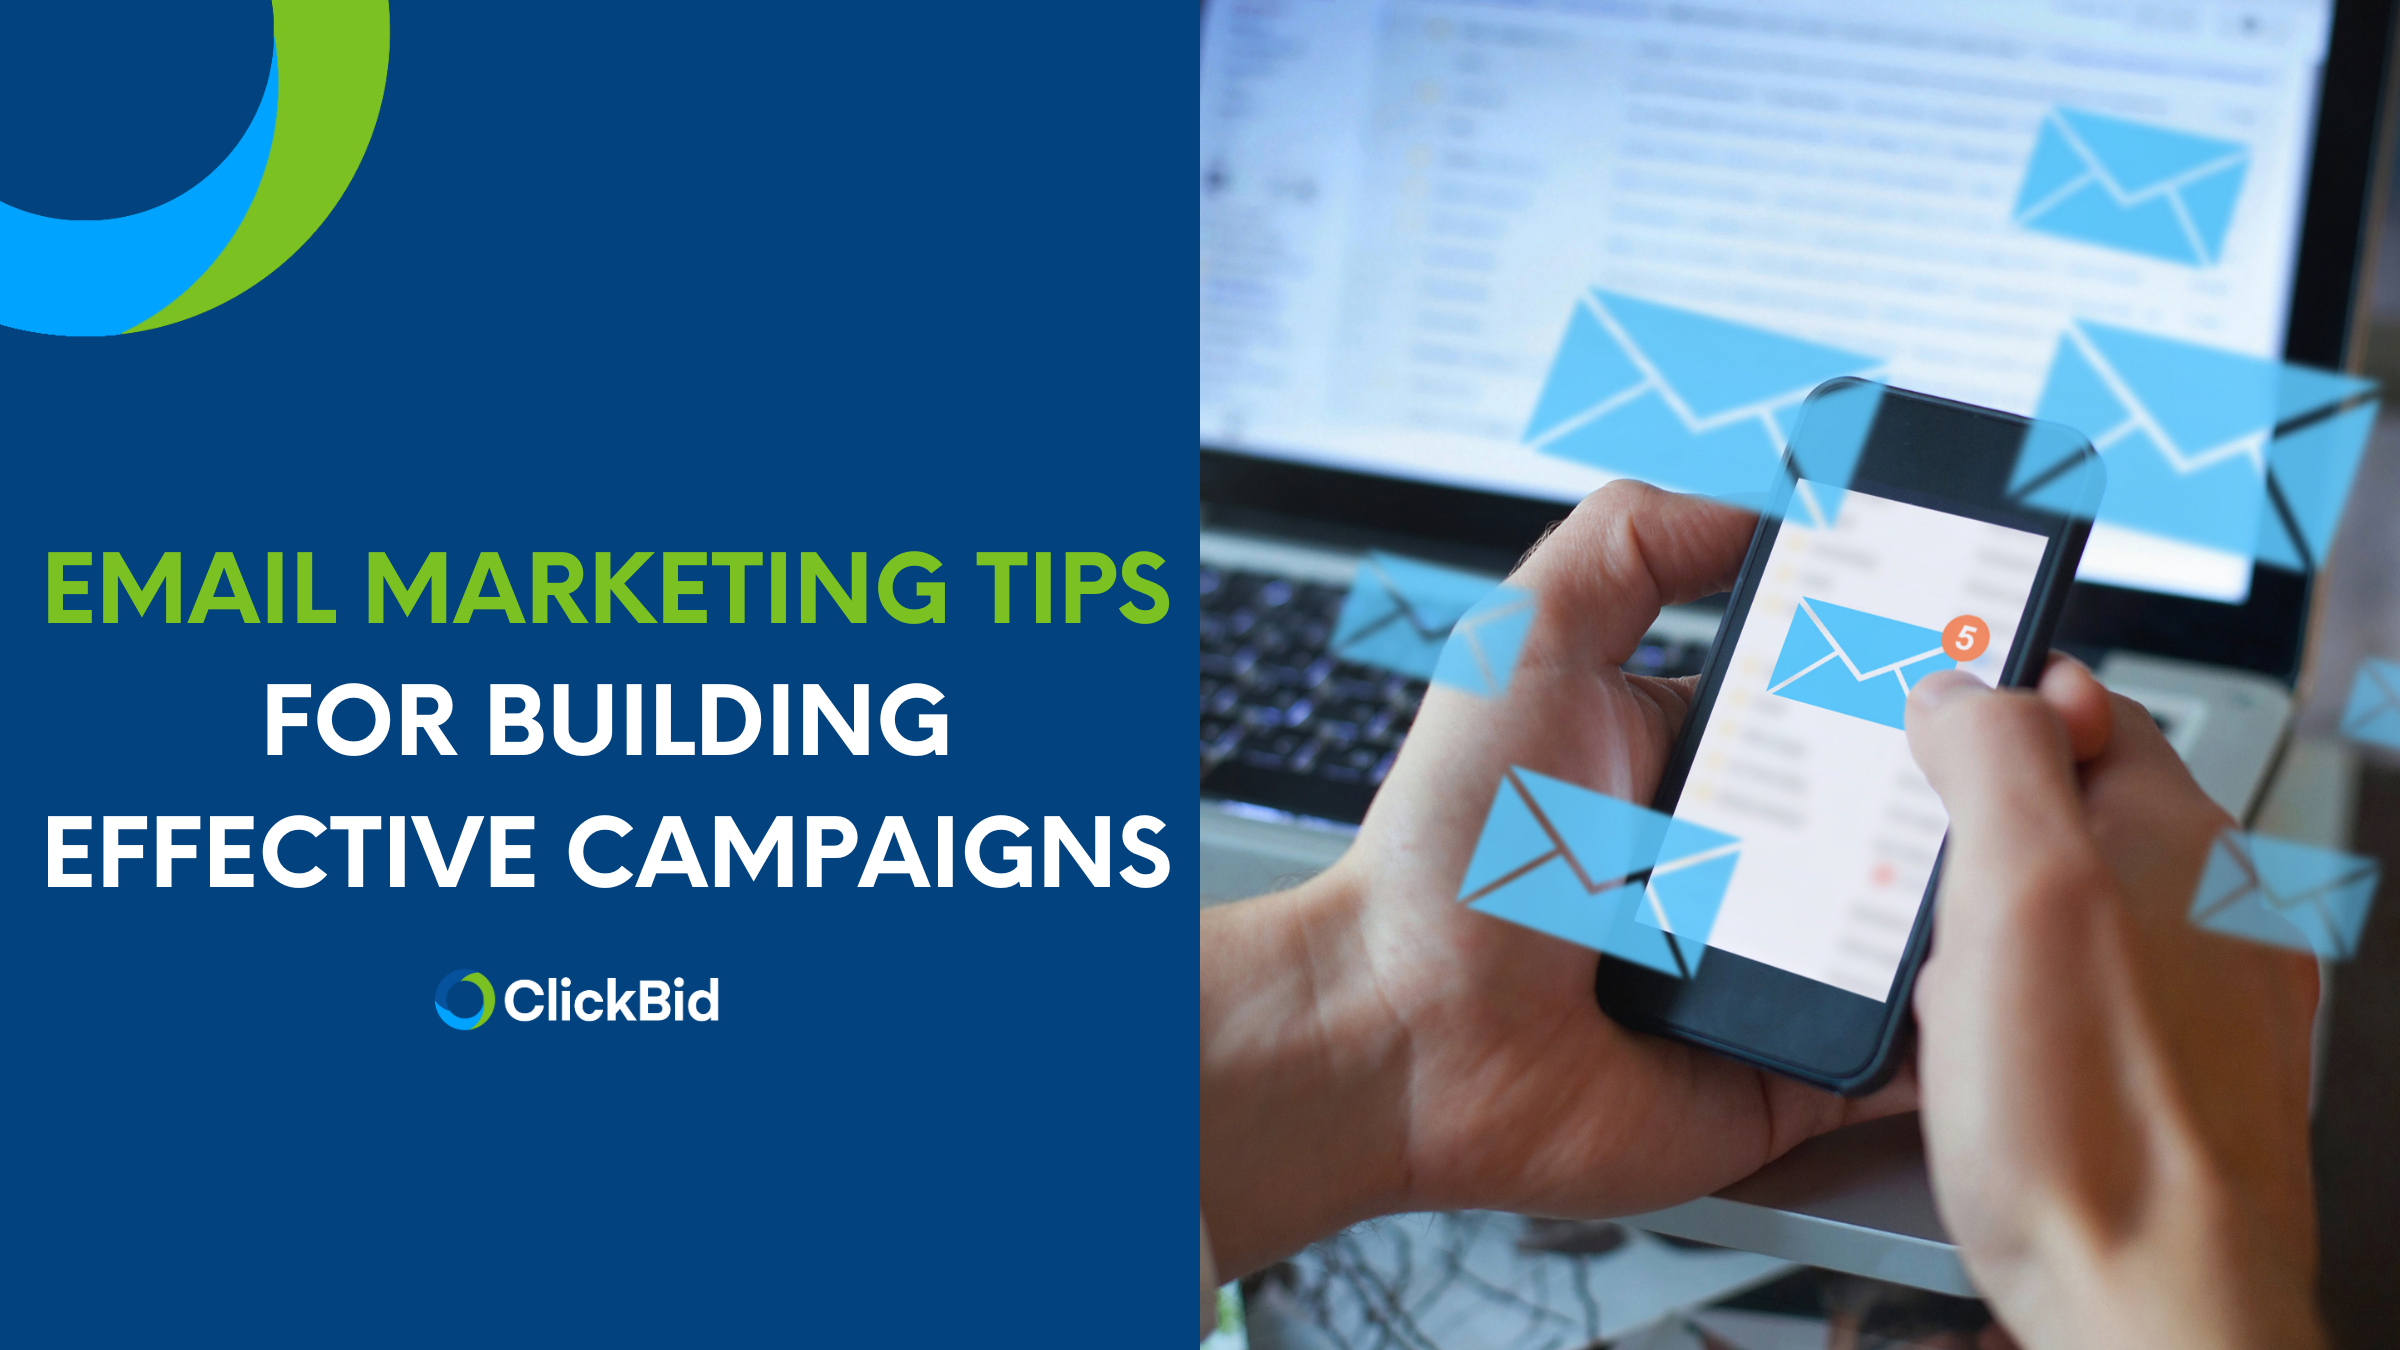 Email Marketing Tips for Building Effective Campaigns